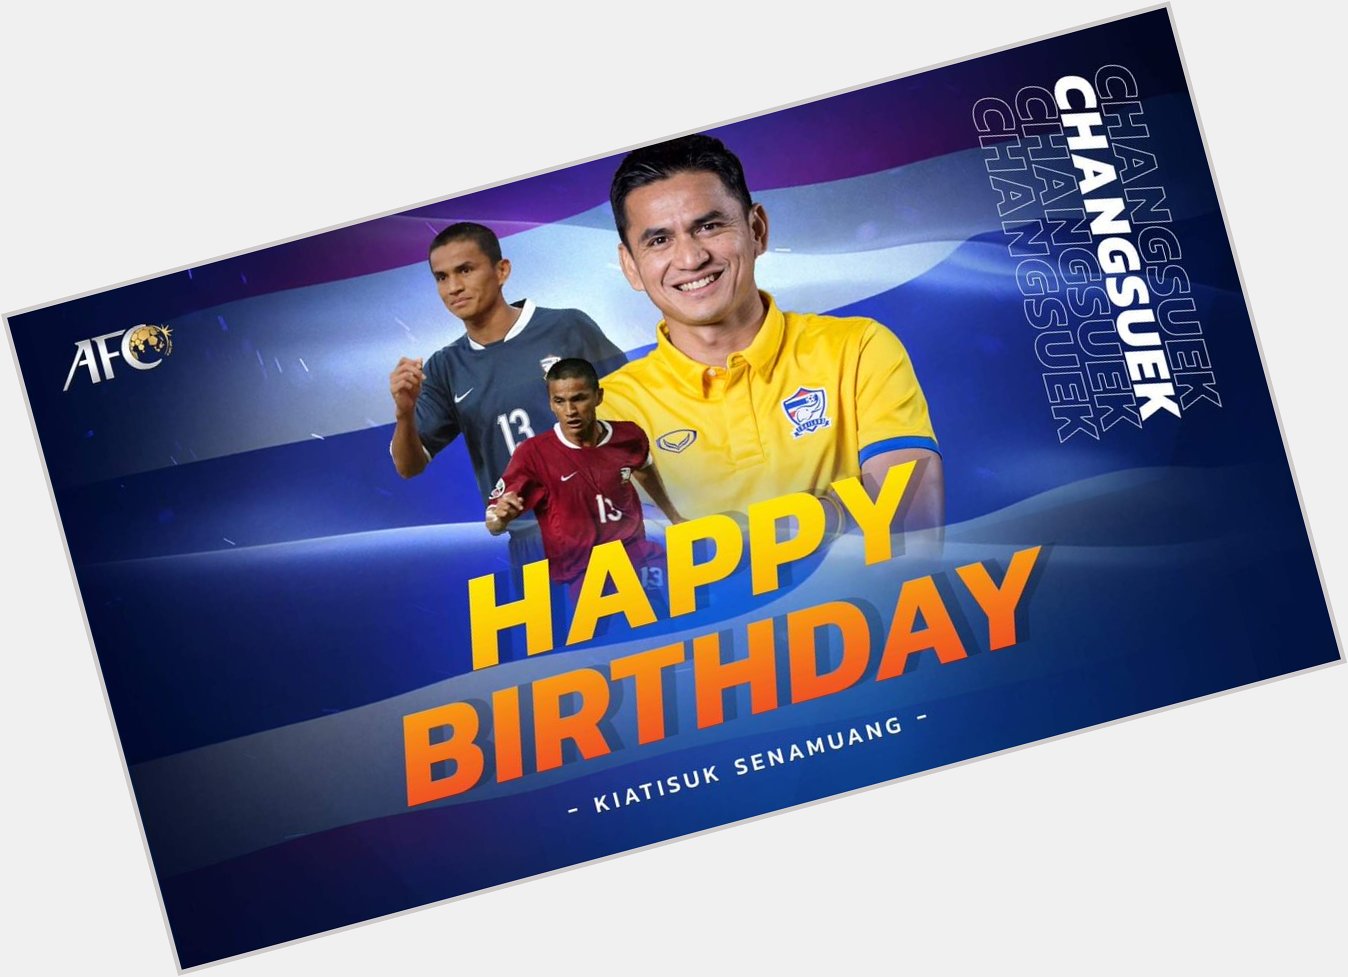  Join us in wishing Kiatisuk Senamuang a happy birthday   The Thailand legend turns 47 today!  | 